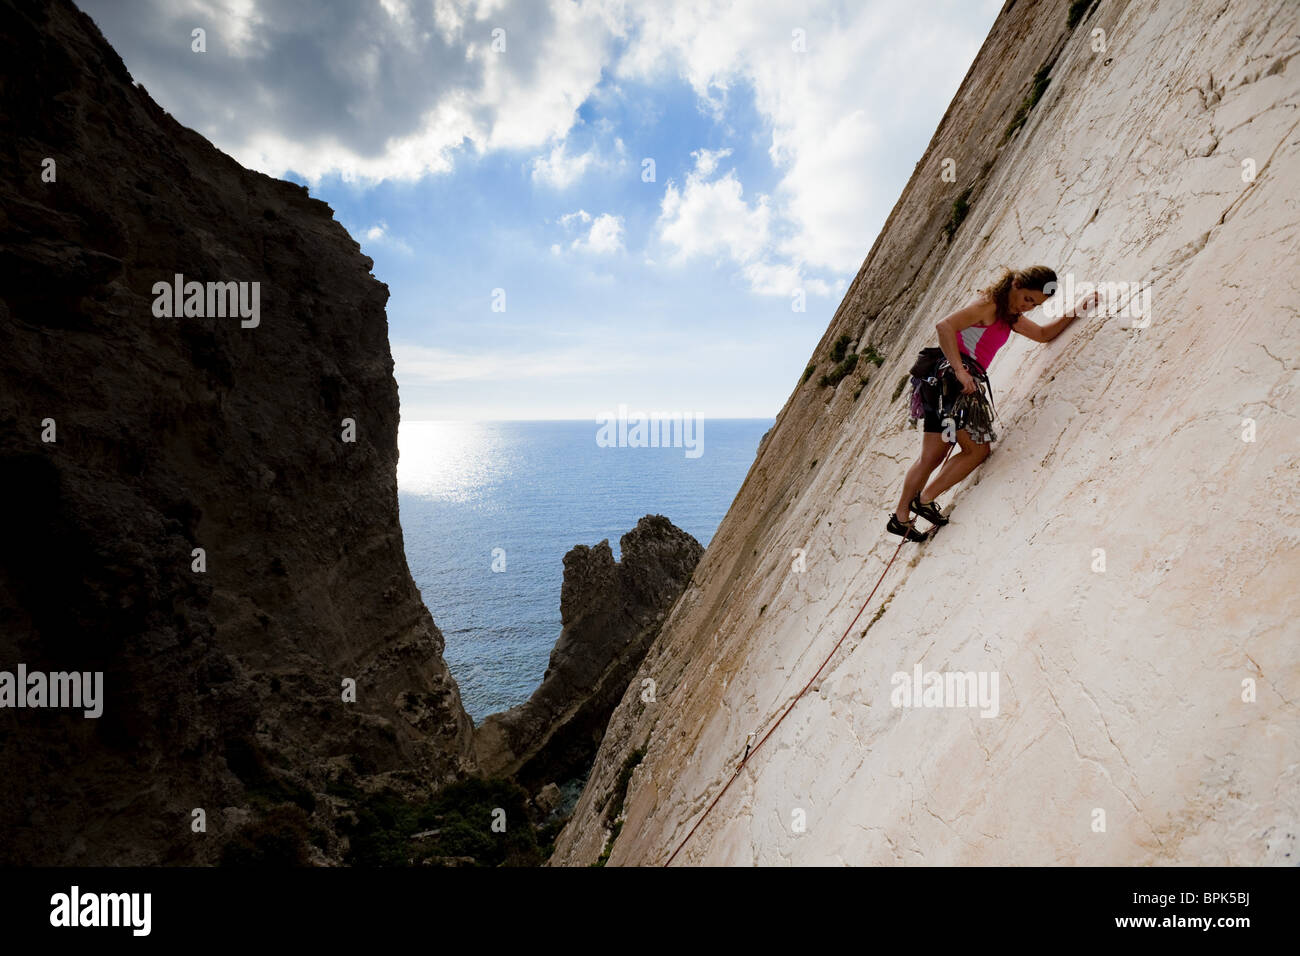 A young woman, a climber, a sportclimber, freeclimber, climbing at Ix-Xaqqa rock face, Malta, She protects with nuts and wires, Stock Photo